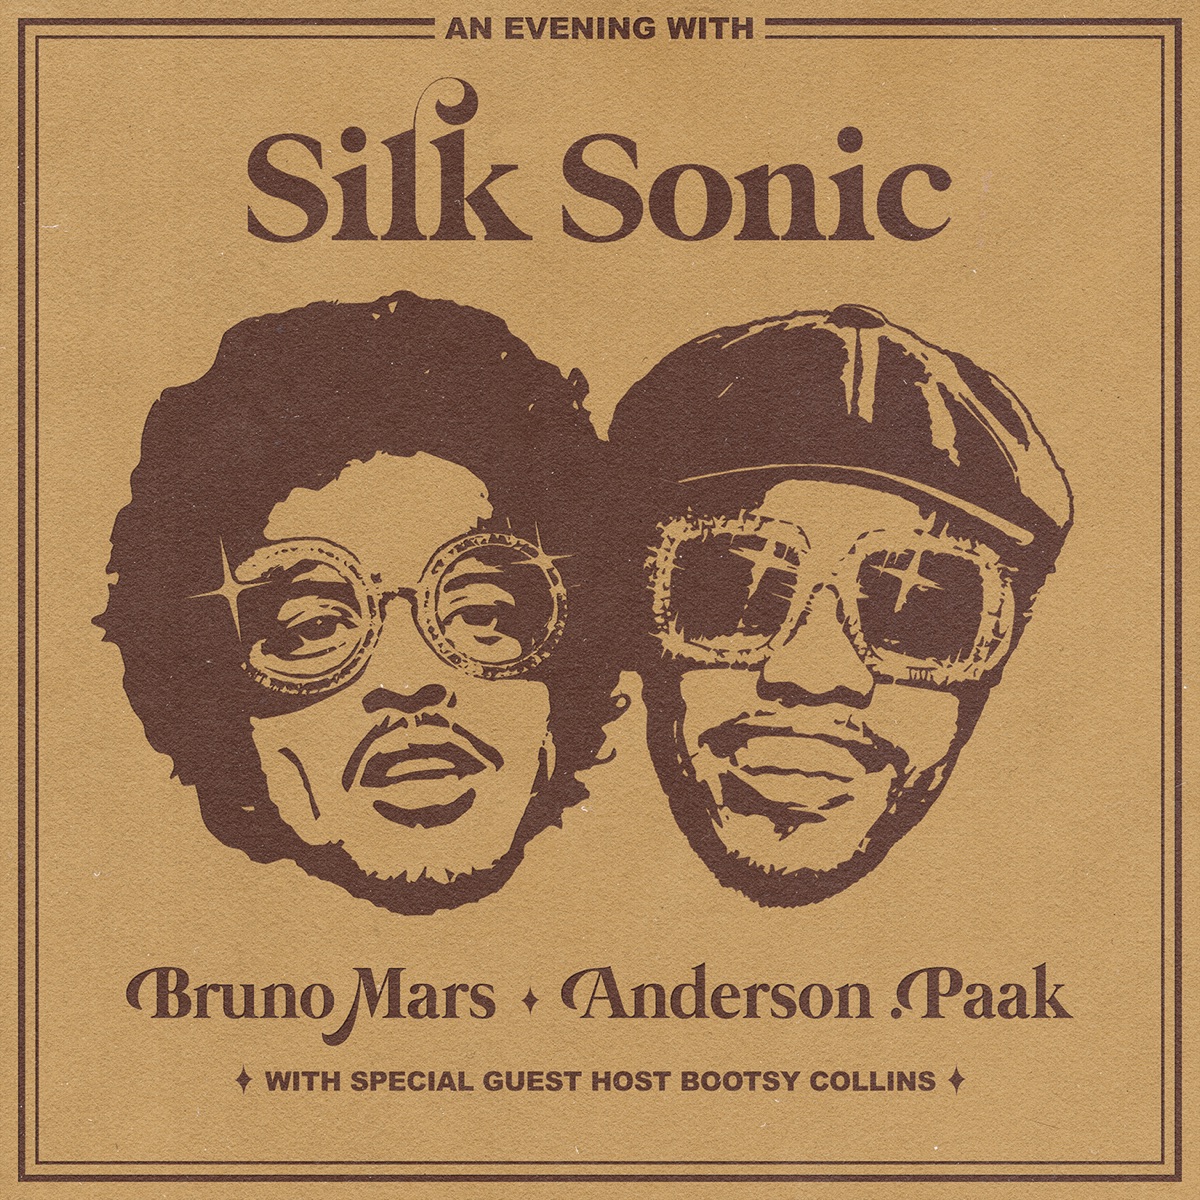 Cover for『Bruno Mars, Anderson .Paak, Silk Sonic - Silk Sonic Intro』from the release『An Evening With Silk Sonic 』